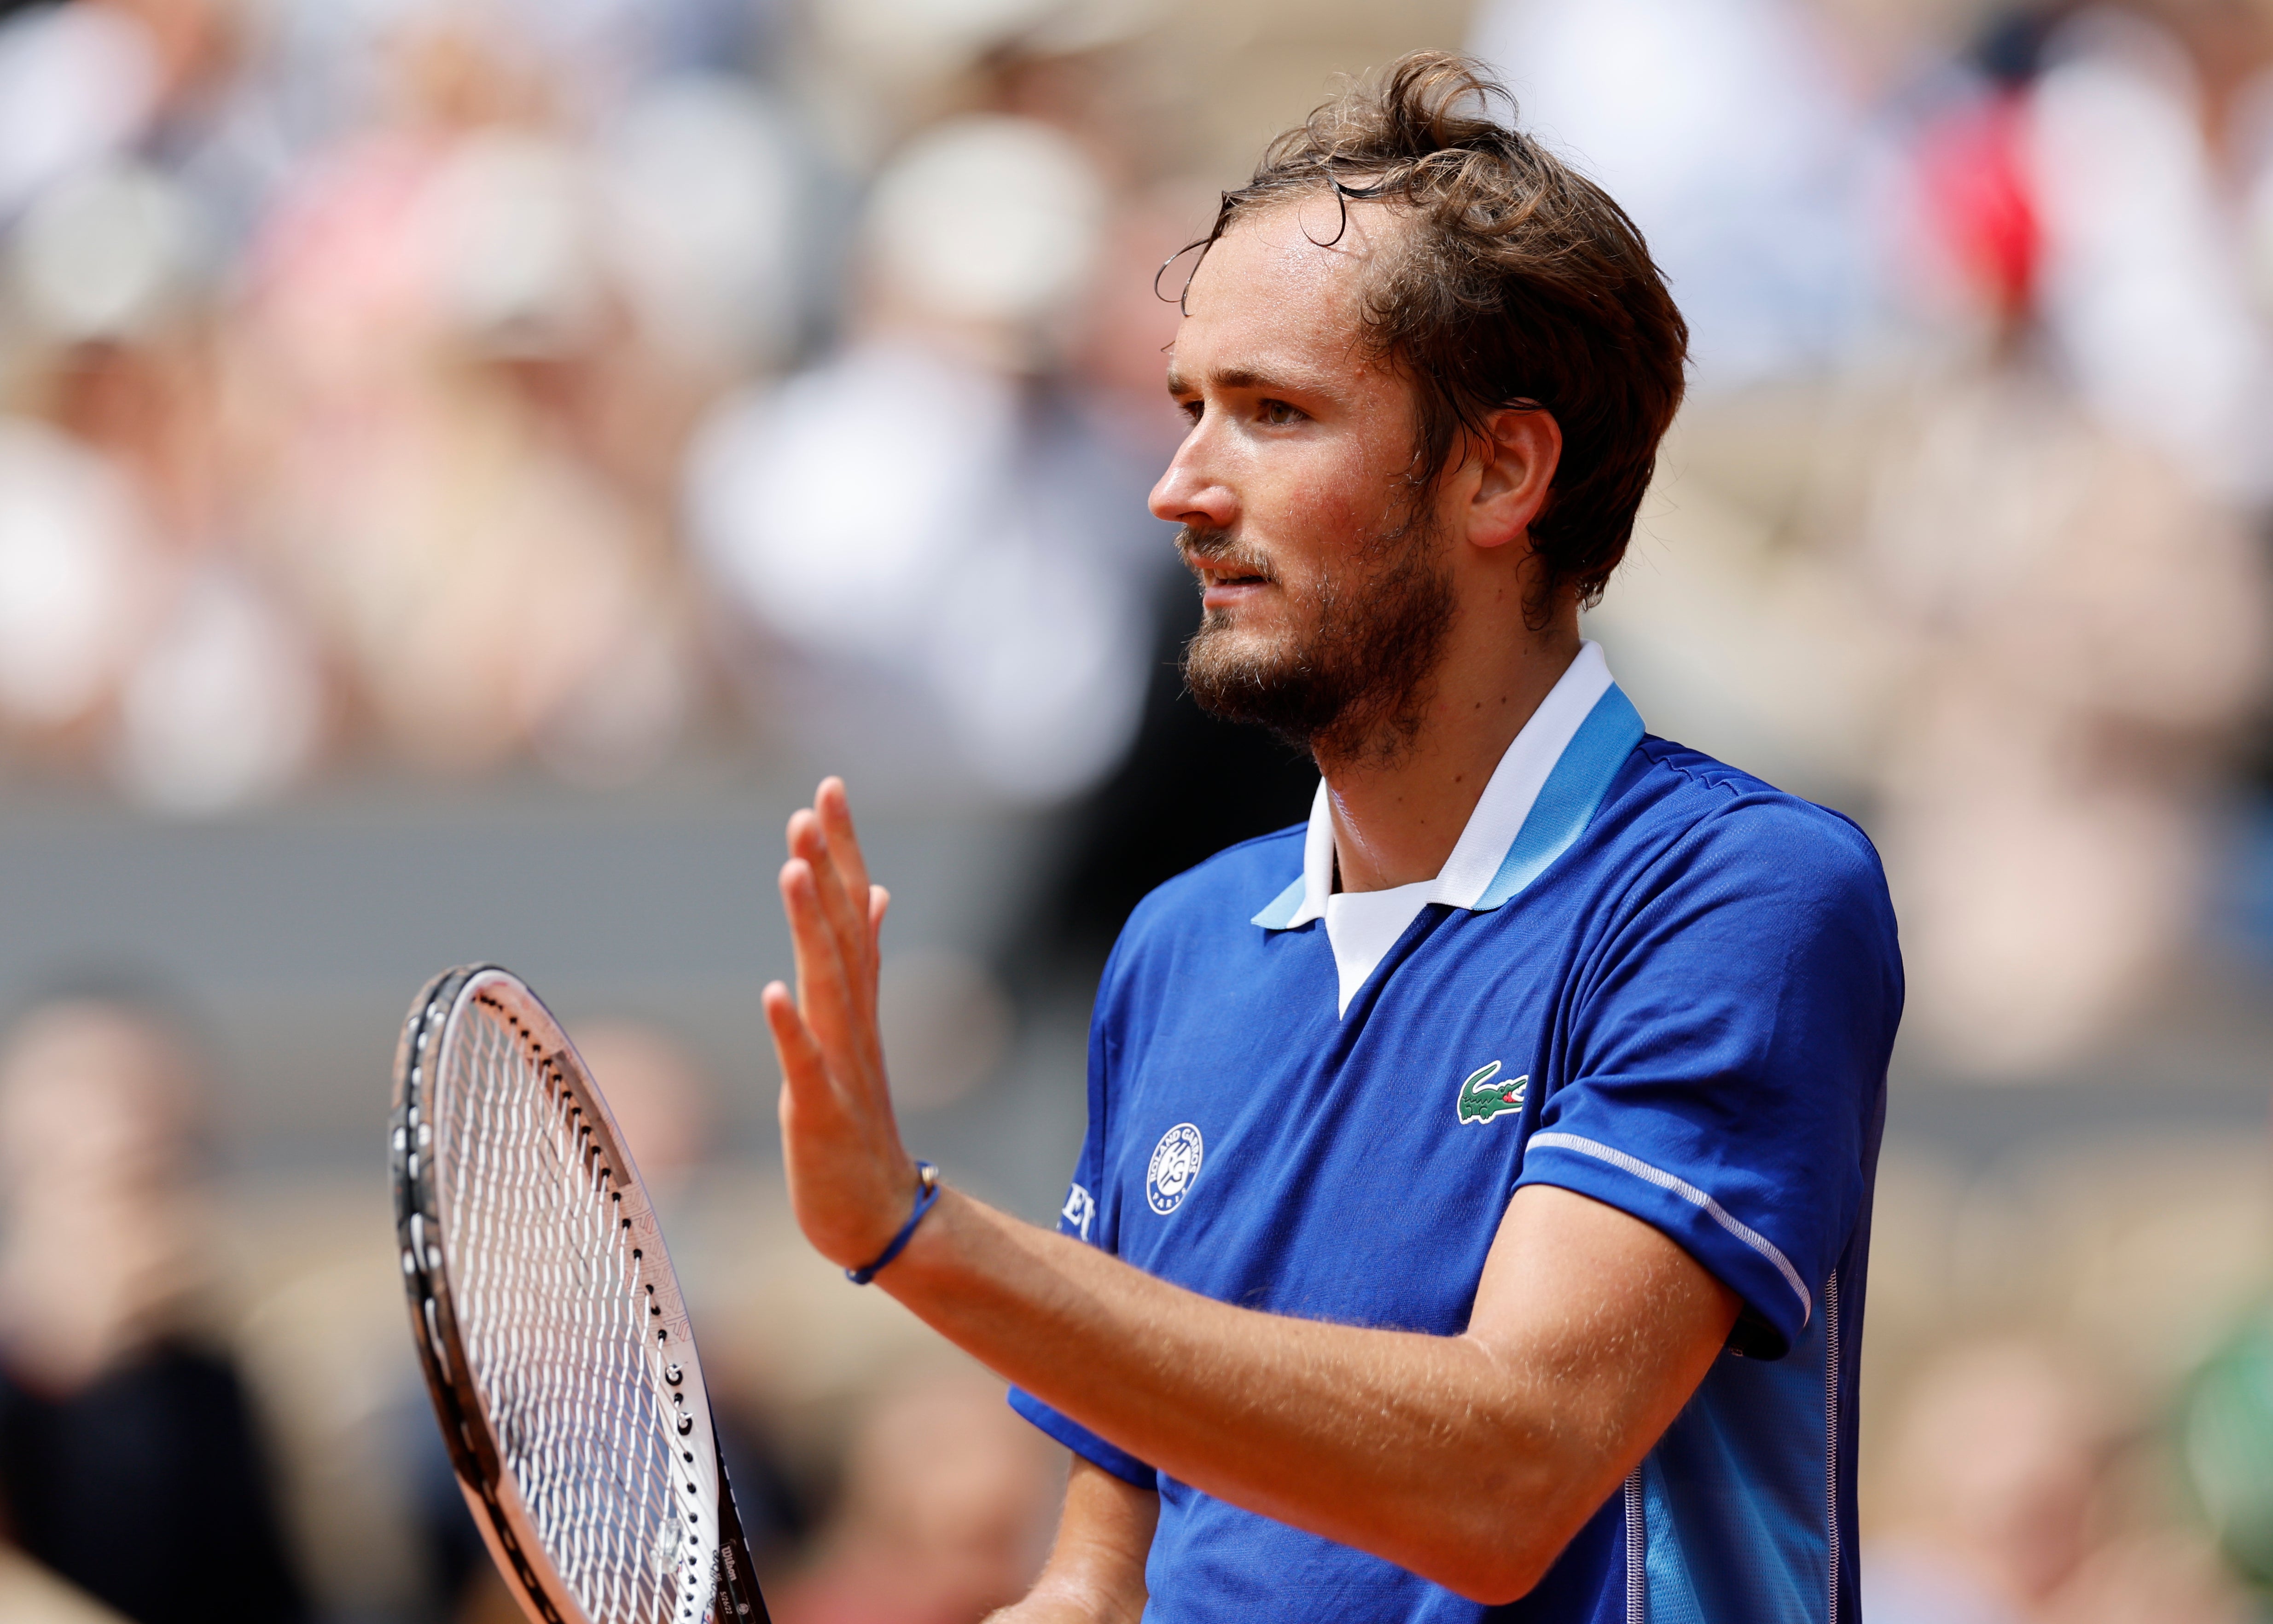 Daniil Medvedev determined to reclaim world No 1 ranking The Independent